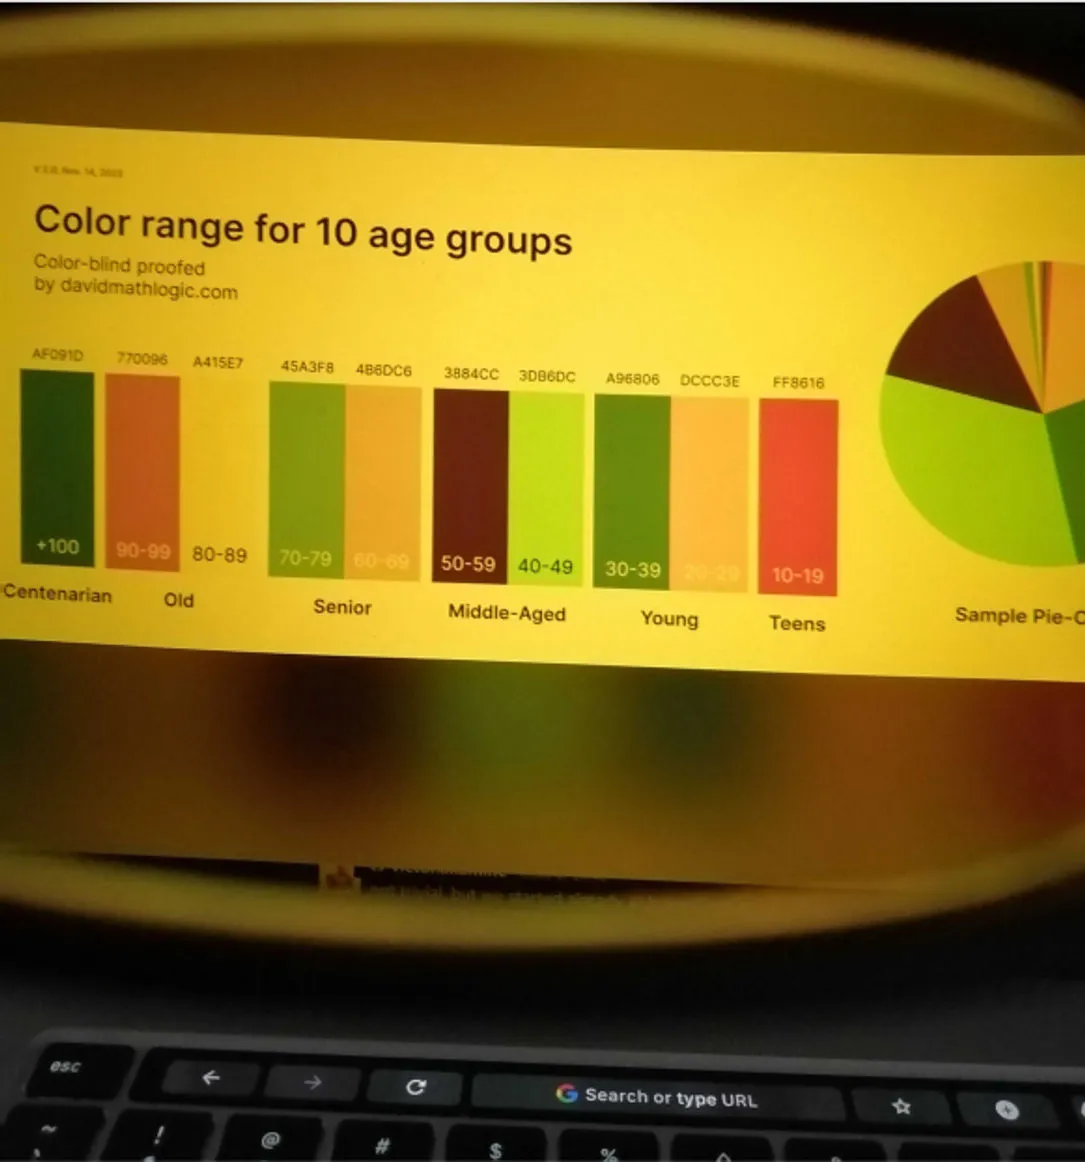 Creating an accessible 10-color palette for color-blind users at Rakuten